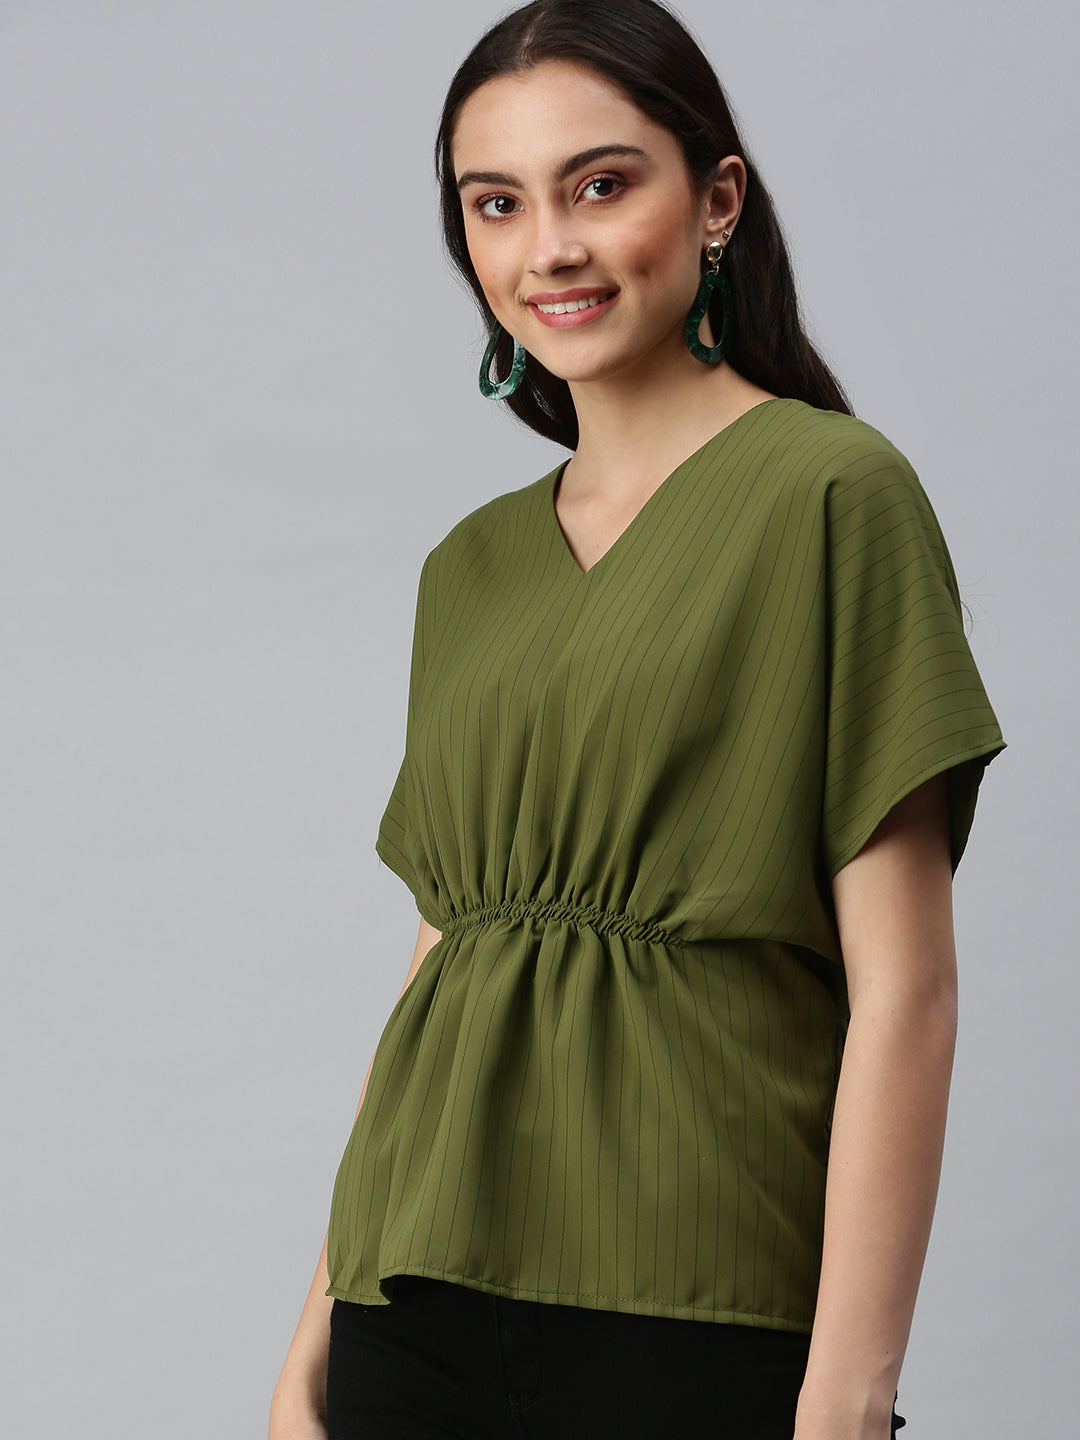 Women's Striped Olive Top